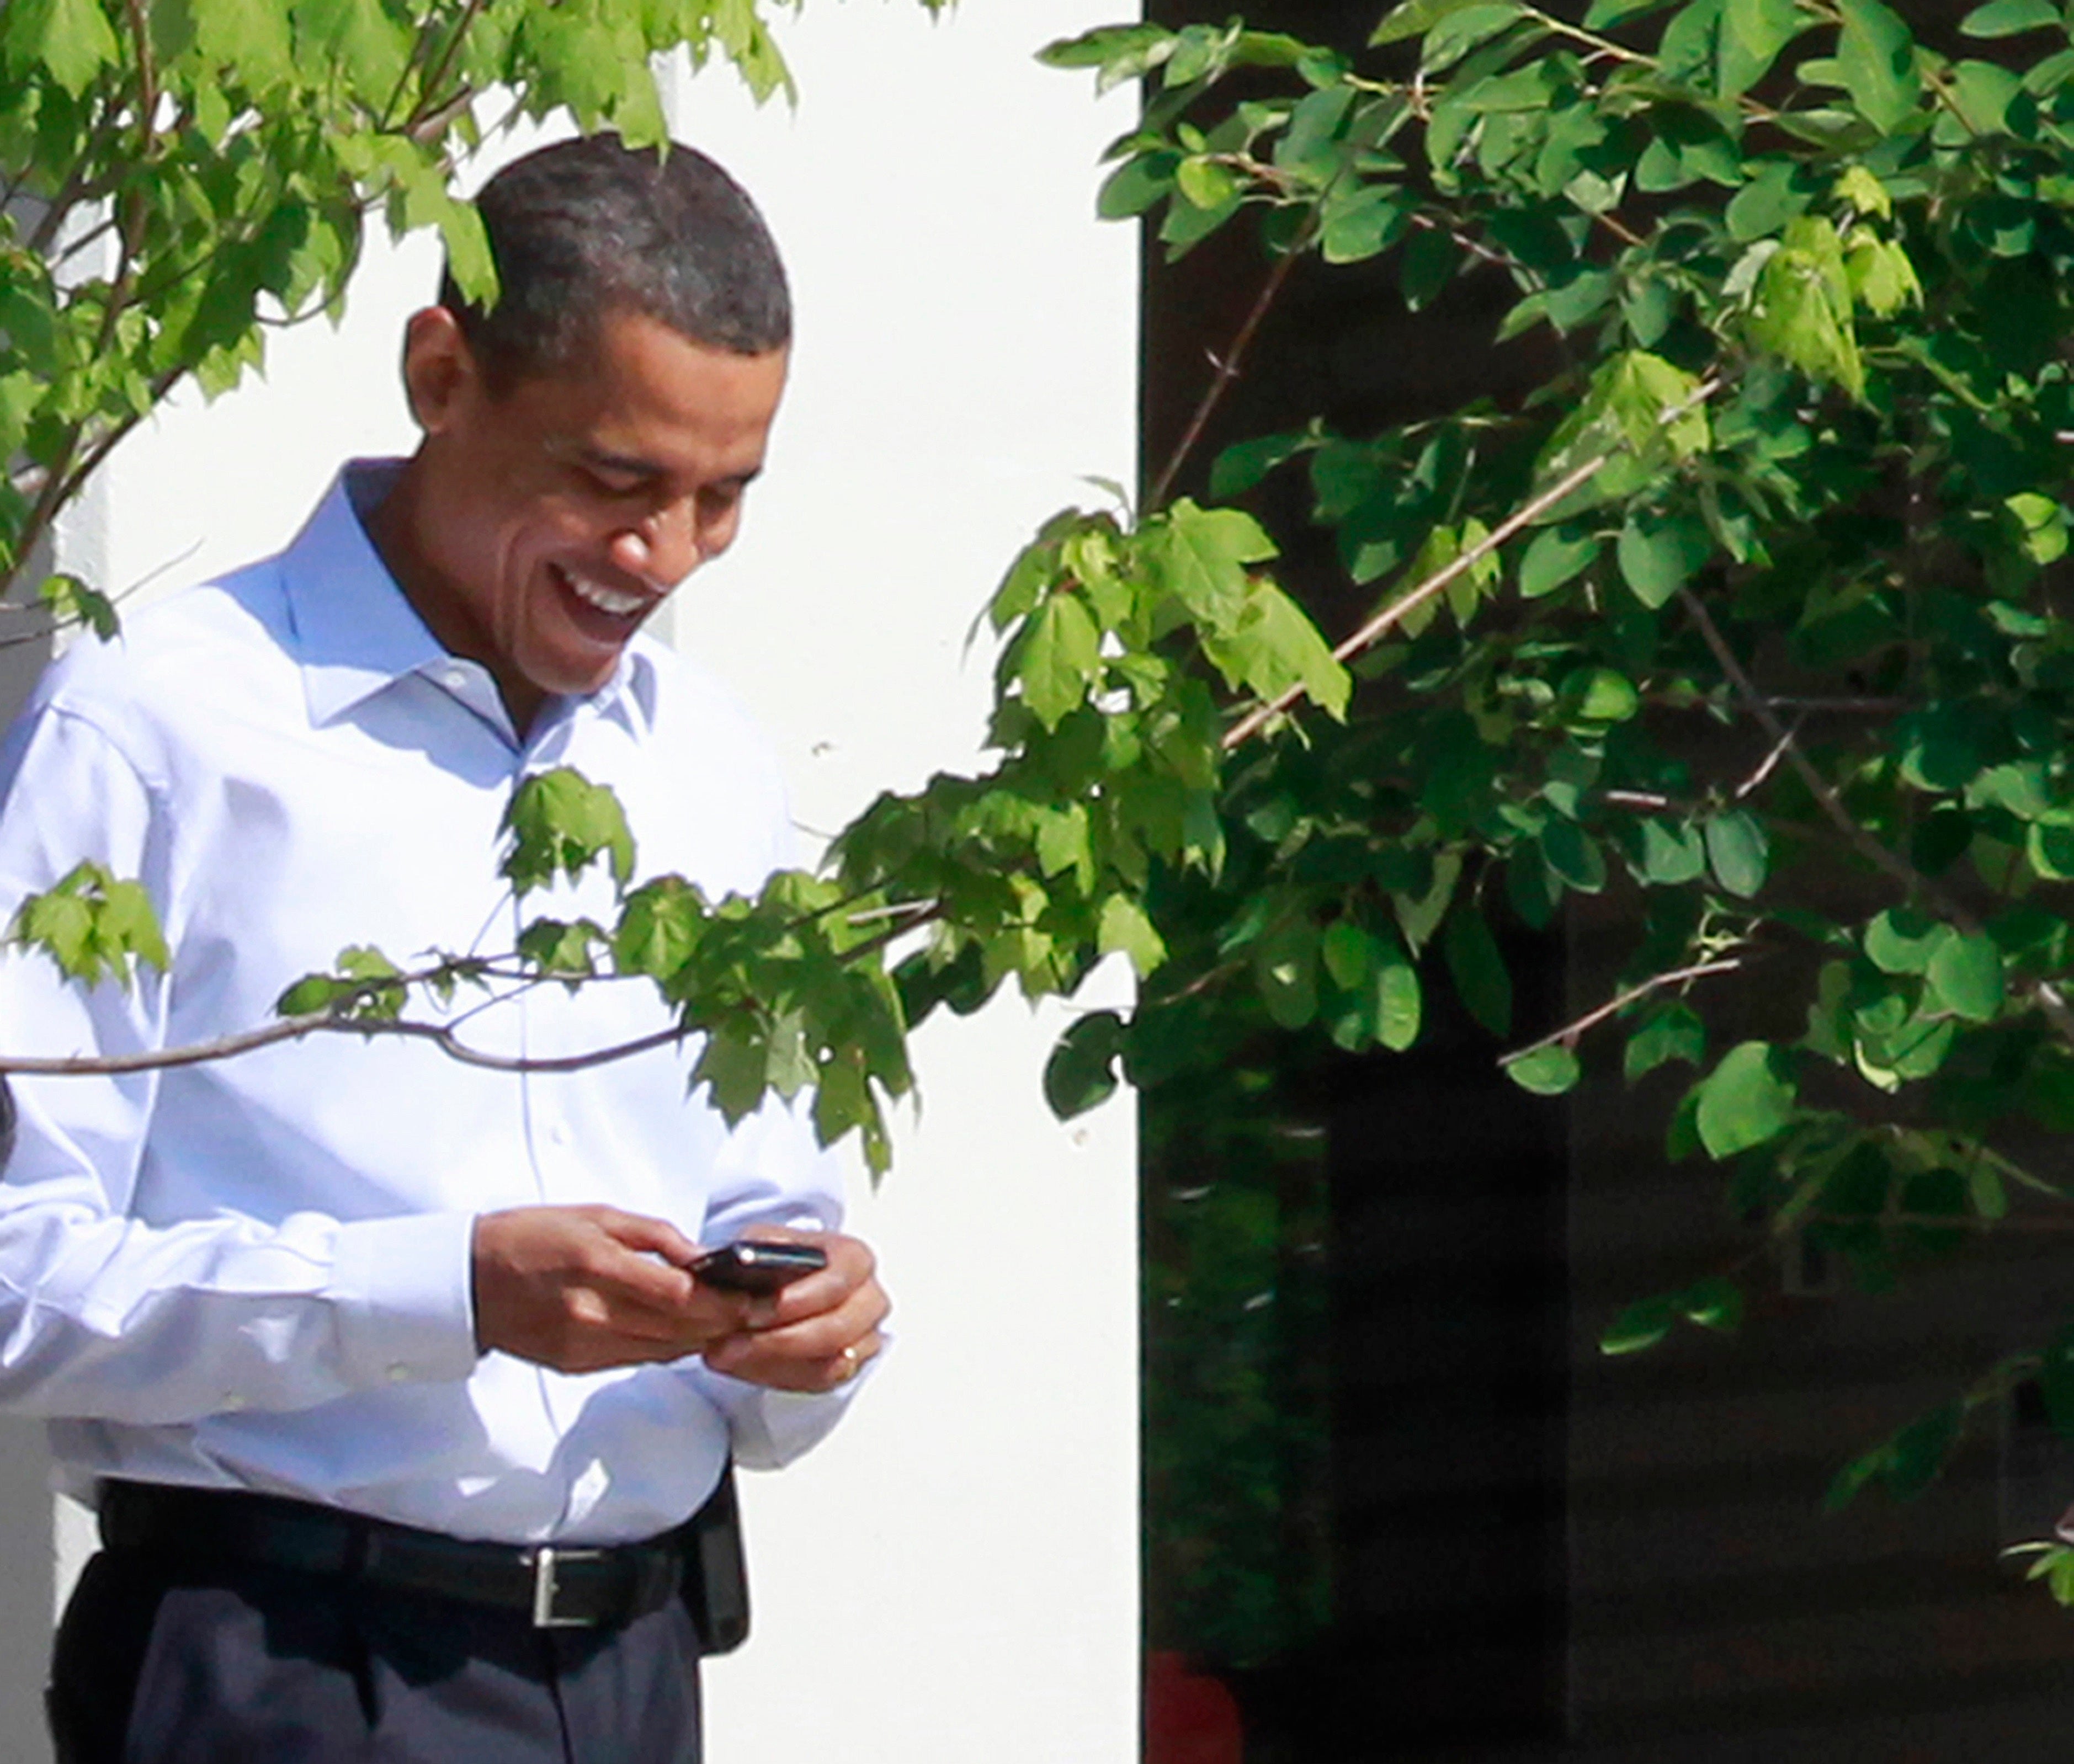 President Obama Hosts First Ever Twitter Town Hall